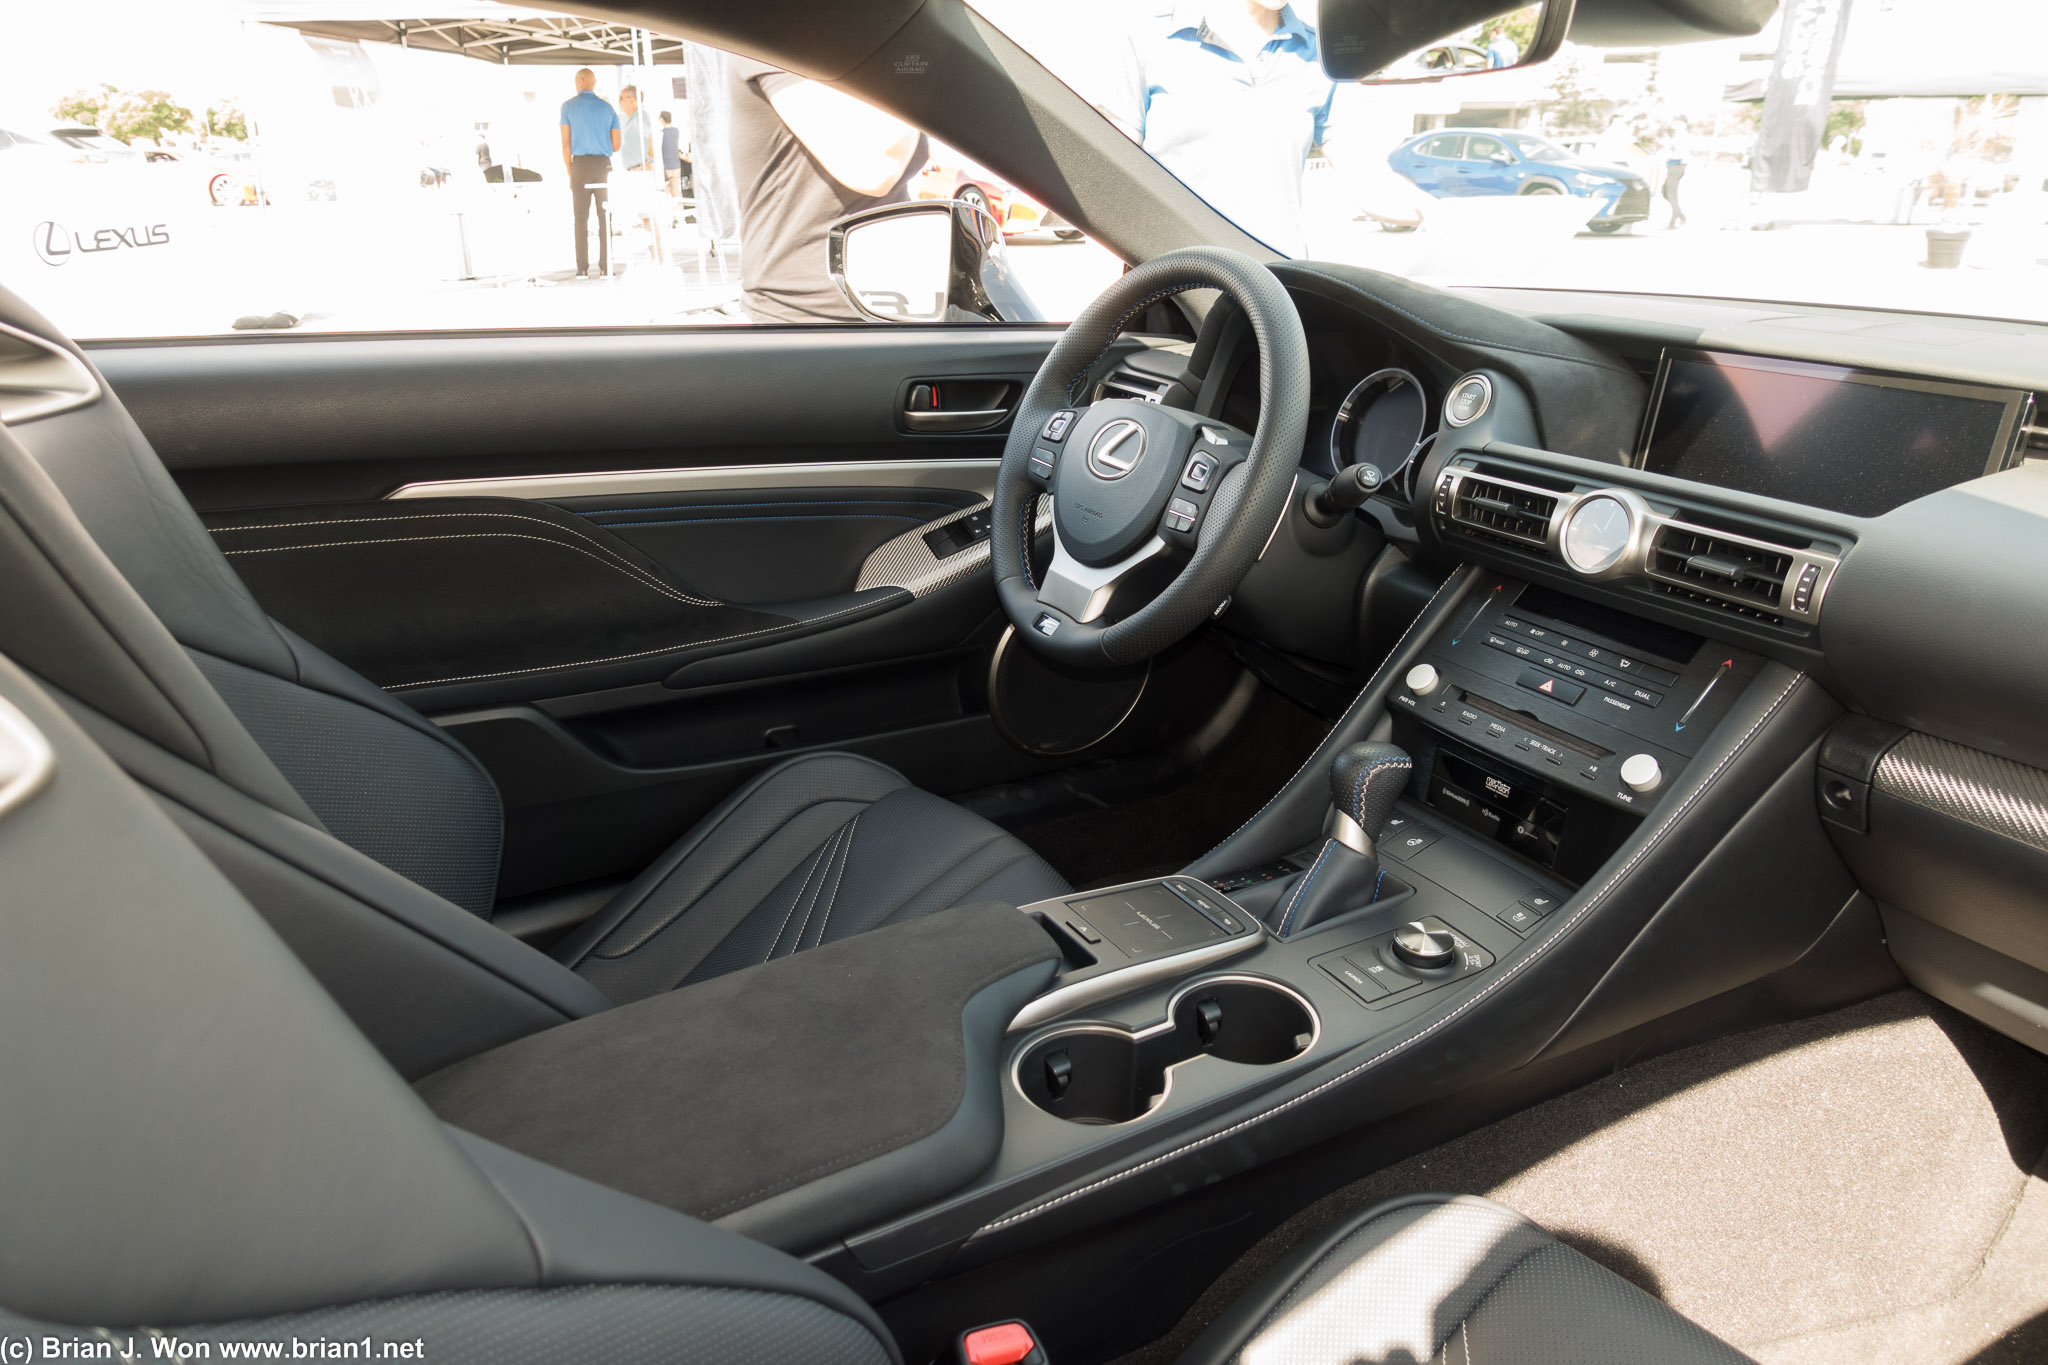 Lexus RC-F interior. Several steps down in quality from the LC.